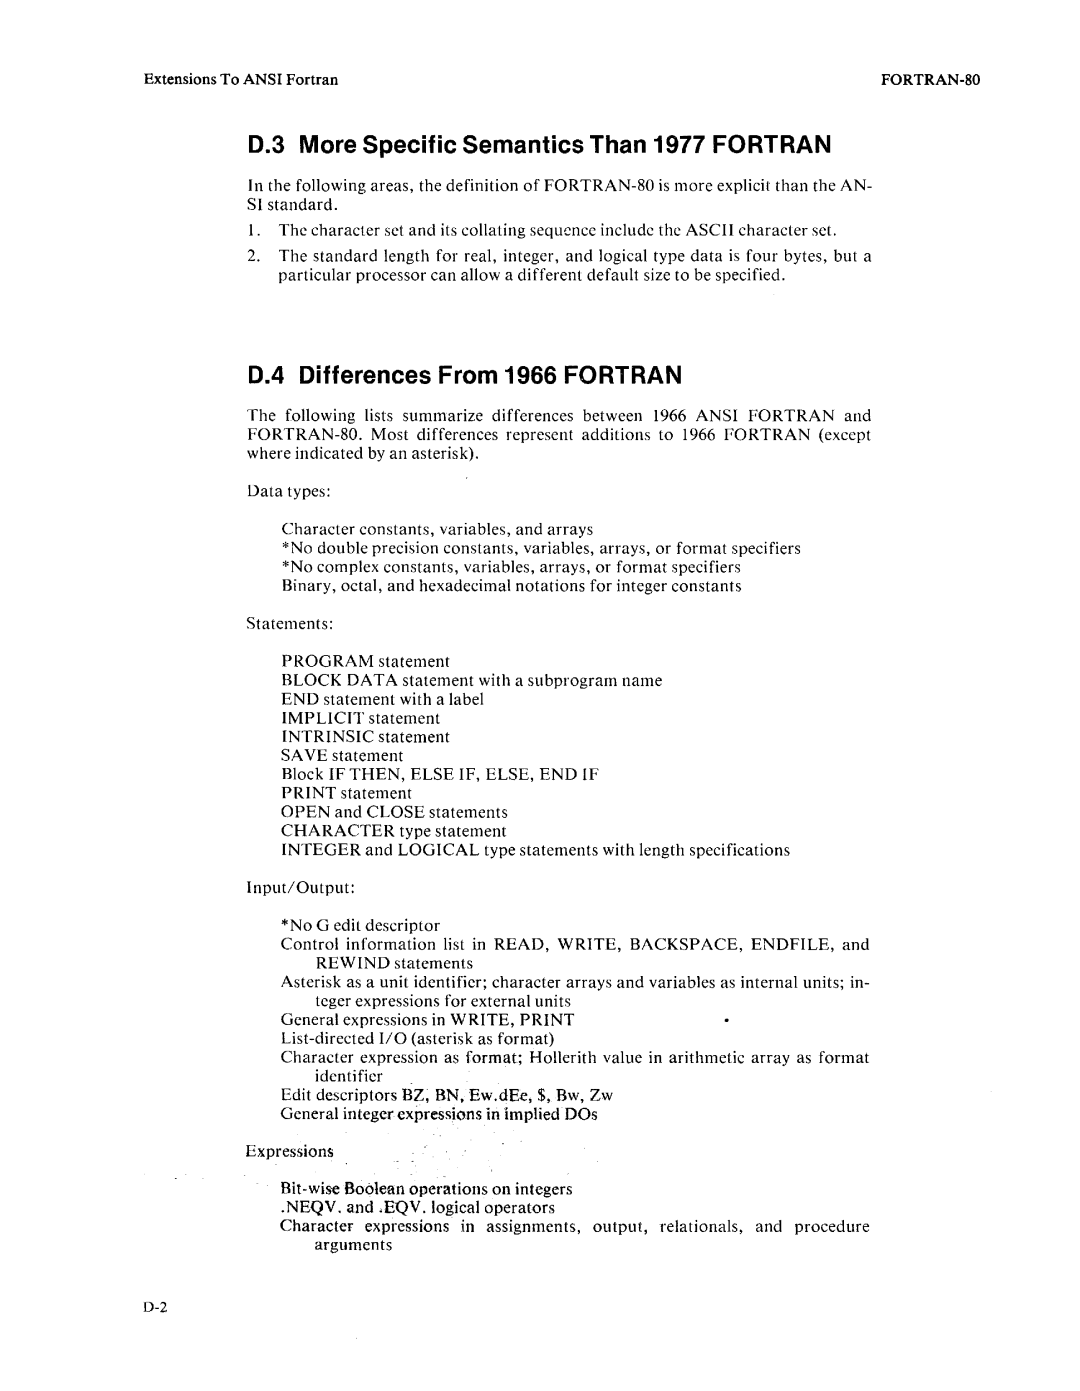 Intel fortran-80 manual More Specific Semantics Than 1977 FORTRAN, Differences From 1966 FORTRAN 